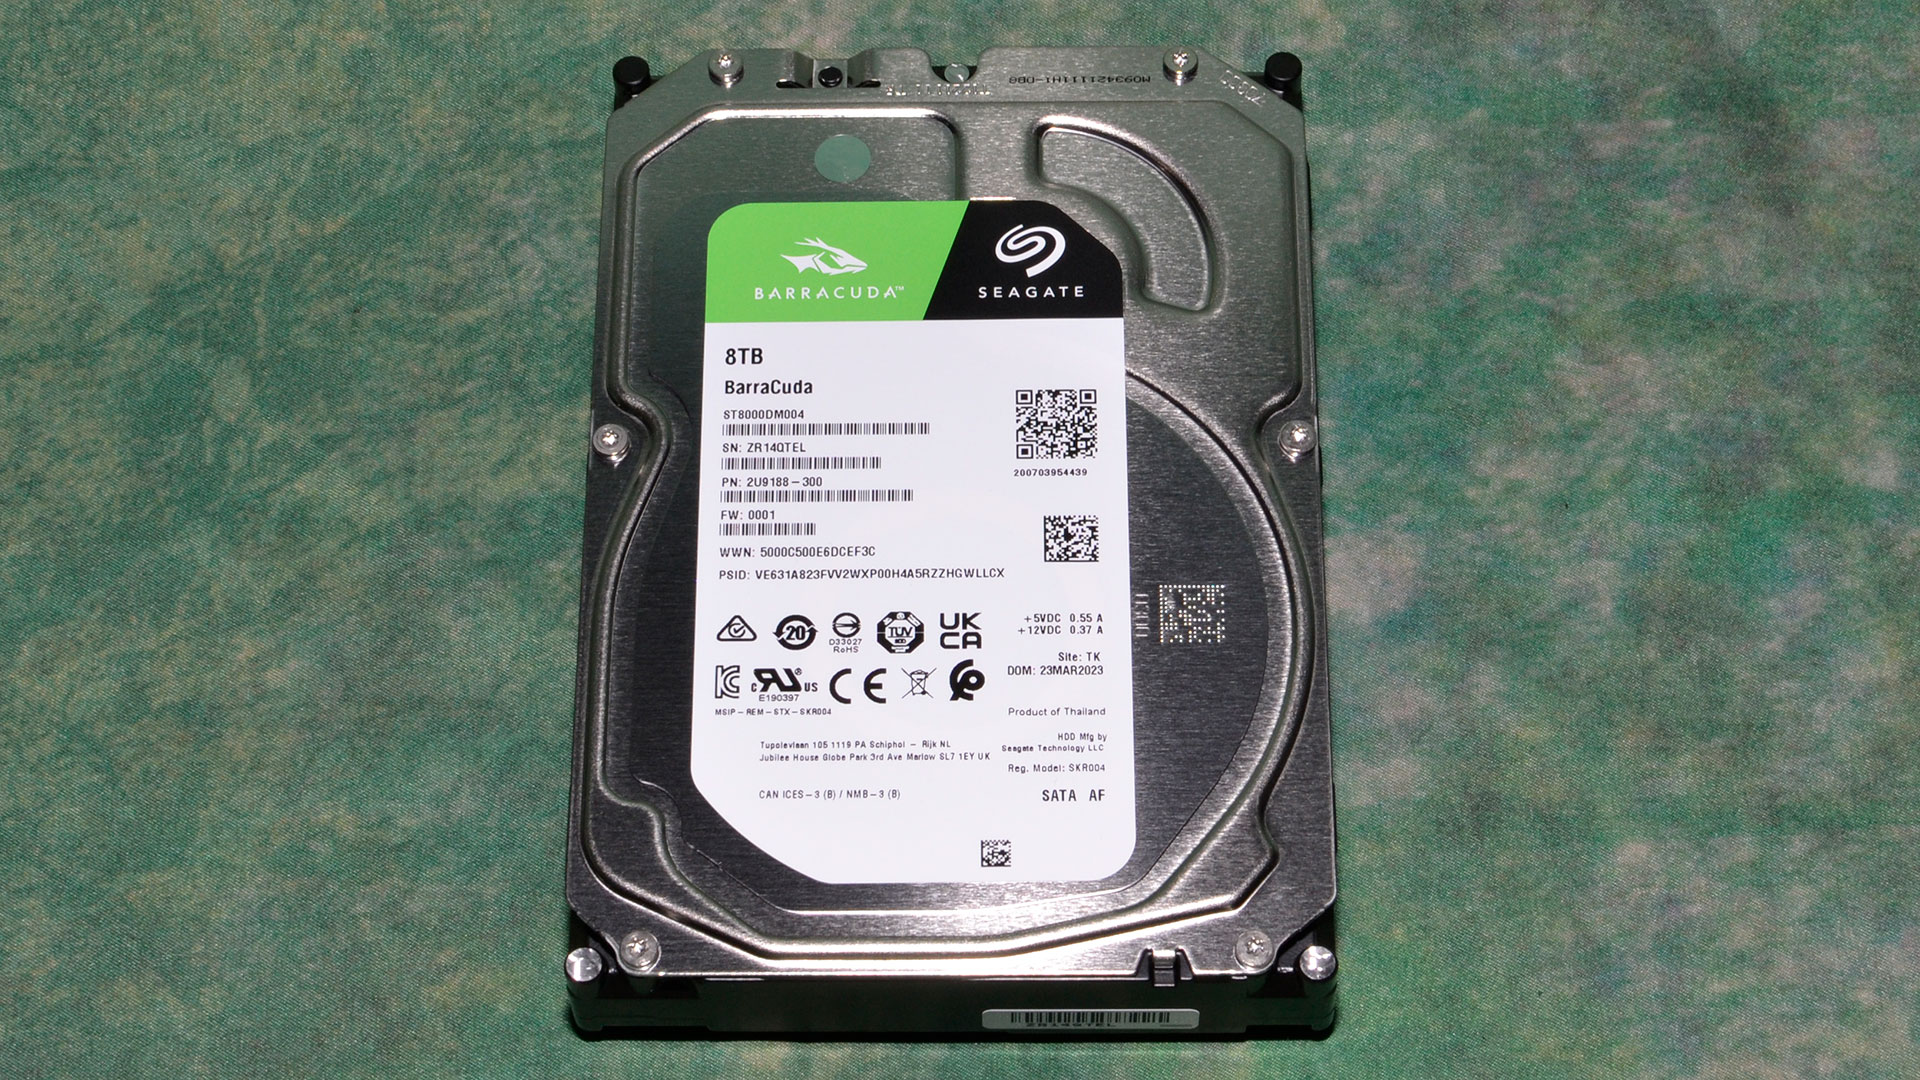 Seagate BarraCuda 8TB HDD Review: The SMR Slowdown | Tom's Hardware